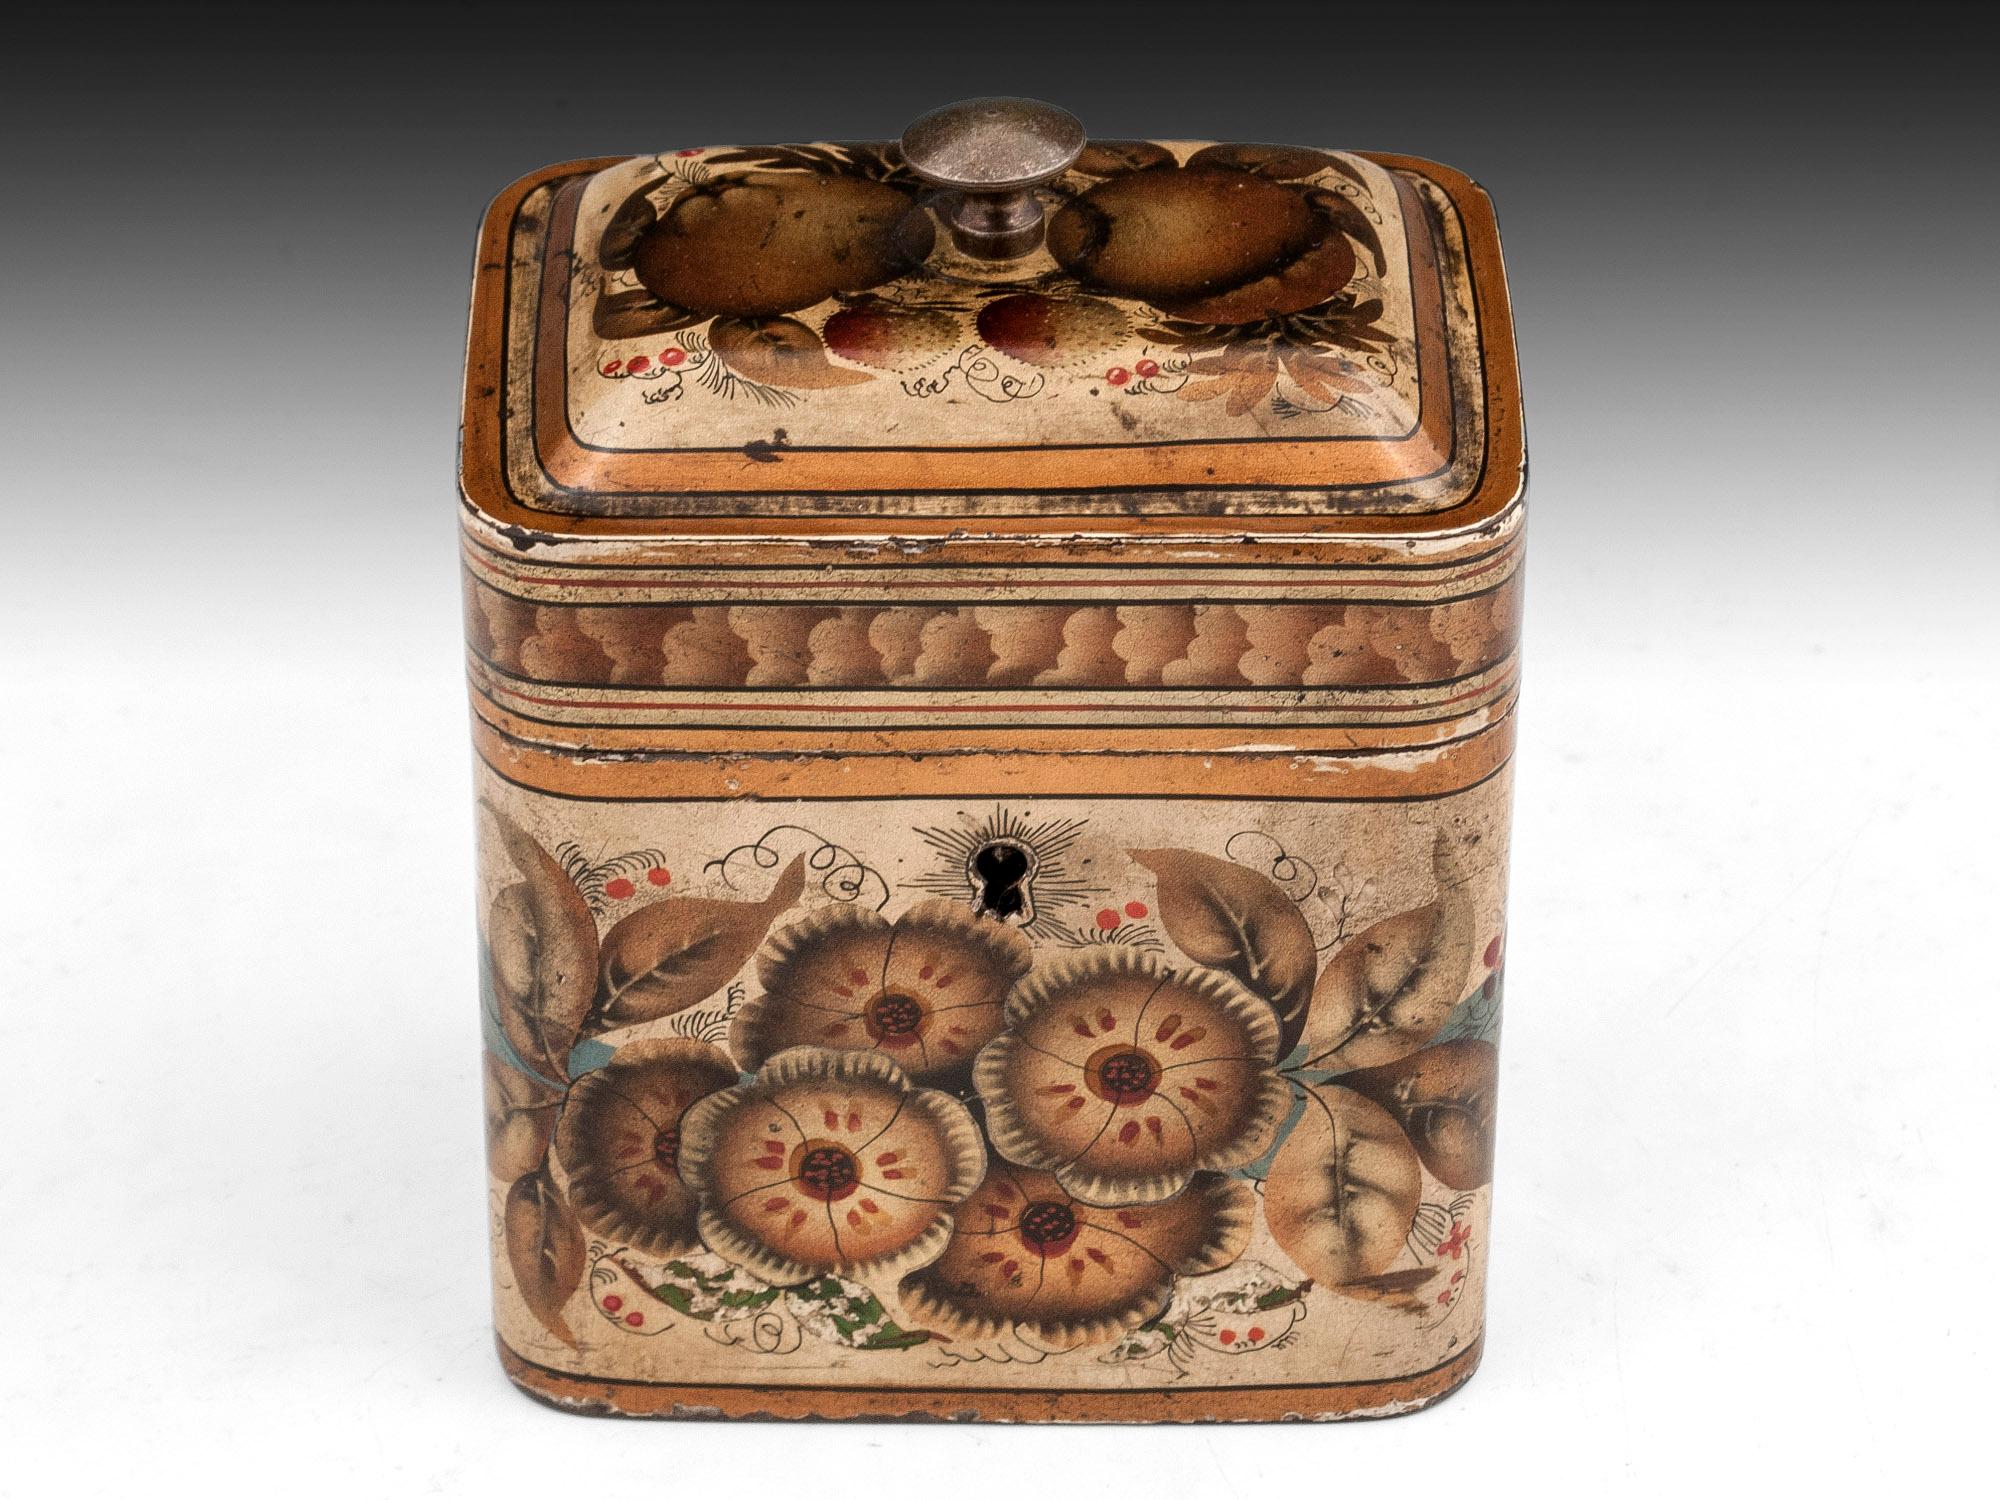 Antique Tinwear Tea Caddy

From our Tea Caddy collection, we are delighted to offer this documented early 19th century Tinwear tea caddy. The top of cushioned shape with raised handle decorated to the body with beautiful floral designs with blue